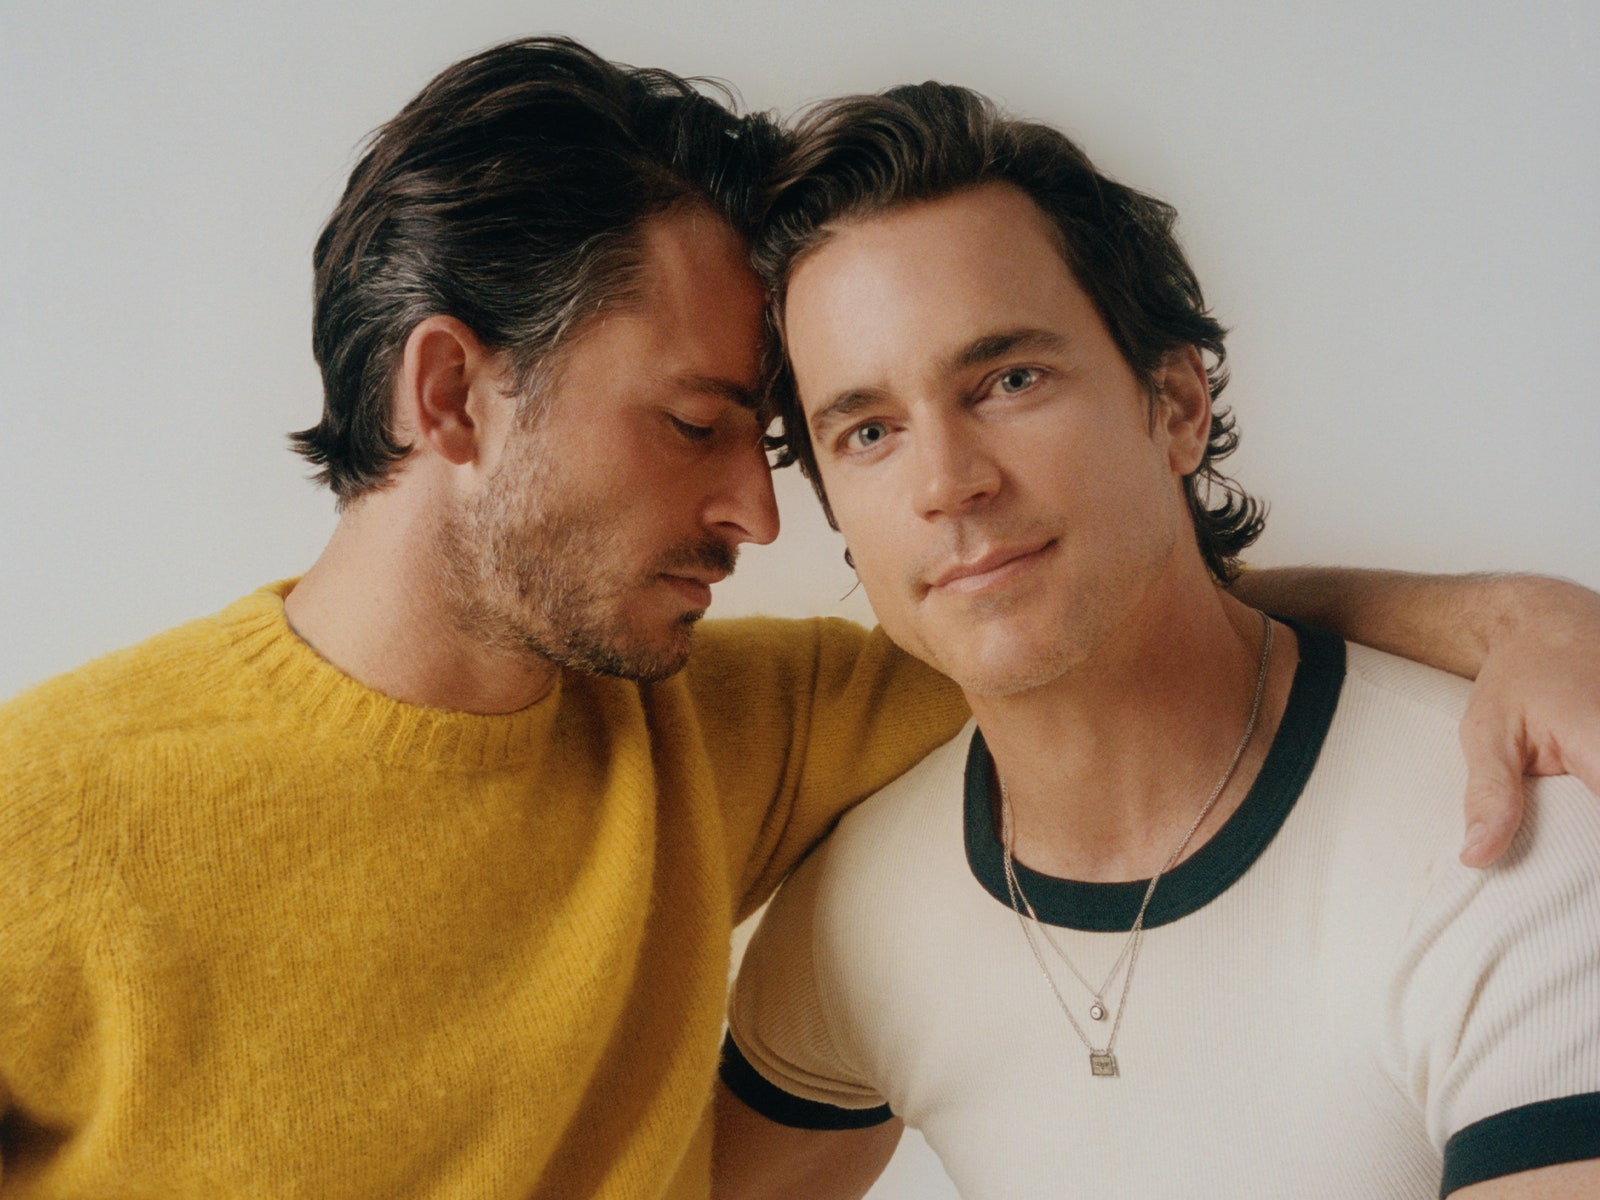 With Fellow Travelers, Matt Bomer and Jonathan Bailey Tell an Epic Gay Love Story Decades in the Making